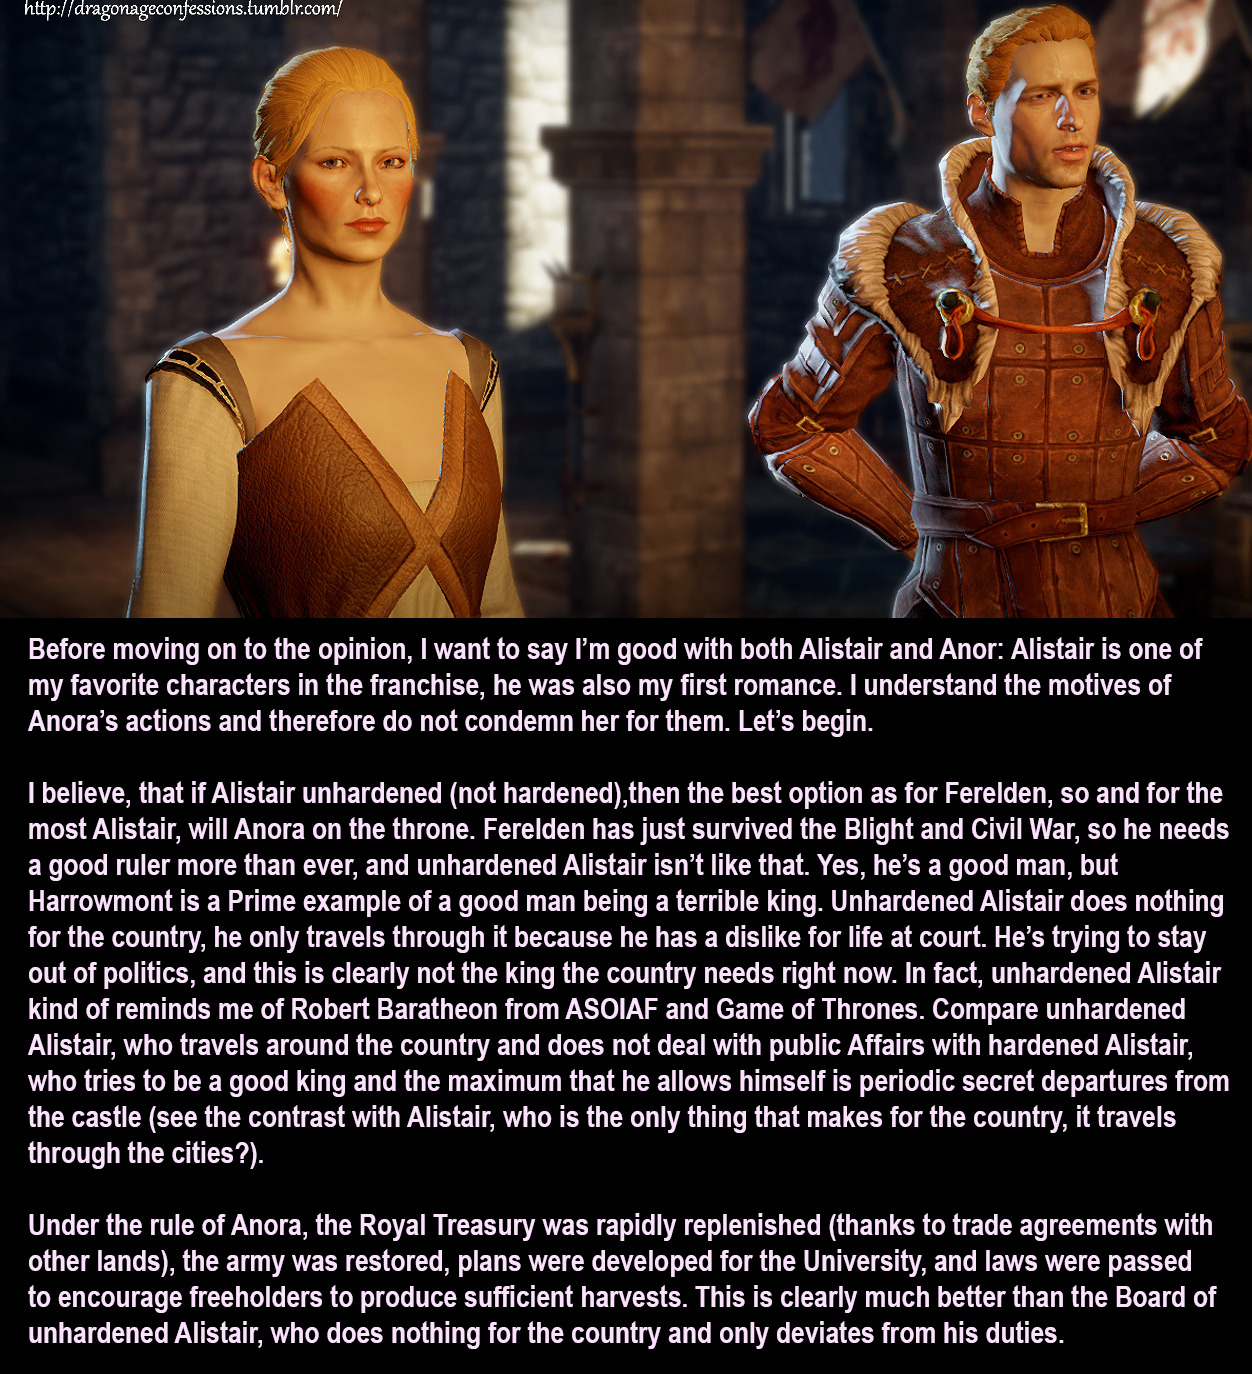 dragon age origins - Is it possible to see how much your companions approve  of you? - Arqade